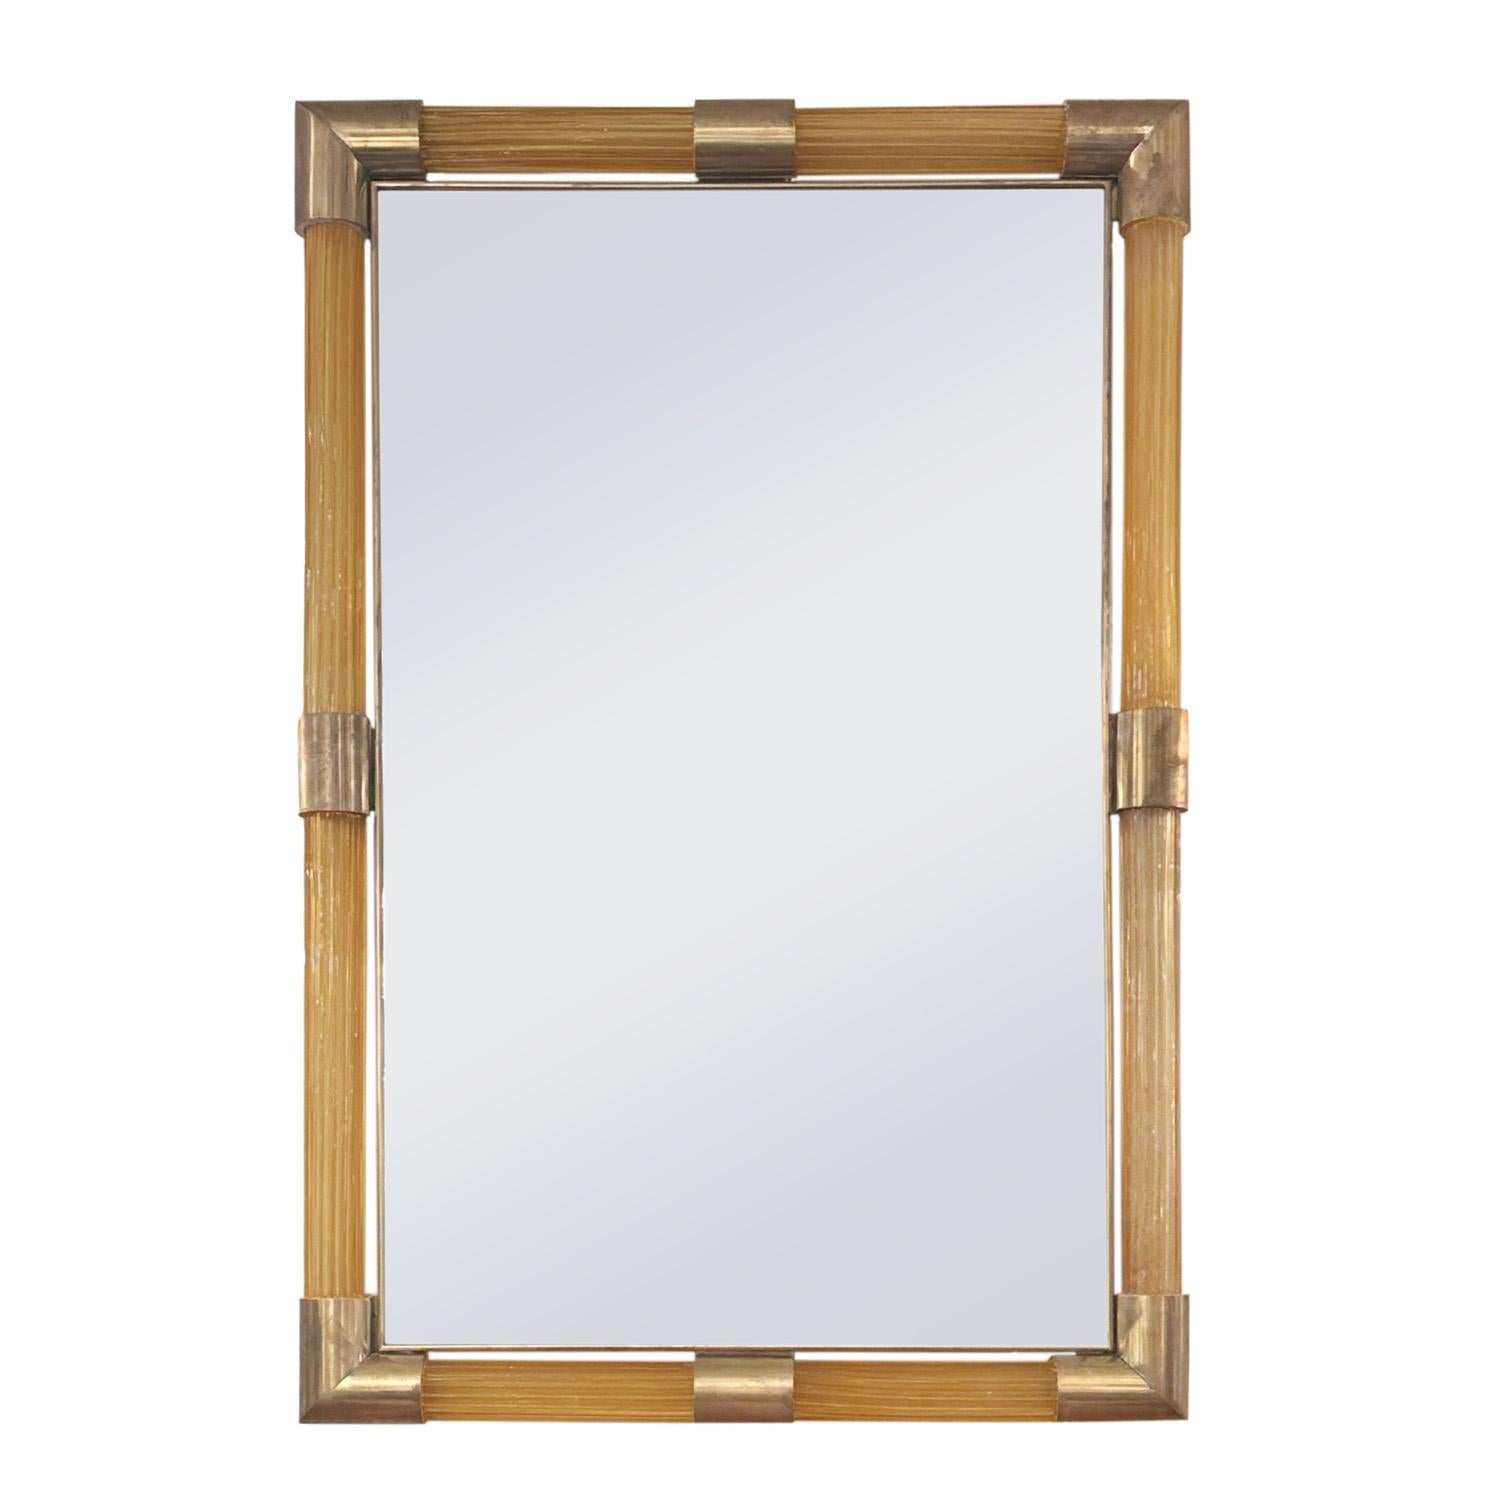 Hand-blown Amber color Murano fluted glass rod framed mirror with un-lacquered brass cuffs at corners and midpoints.
This mirror features a unique fluted design crafted from Murano glass rods, adding a touch of elegance and sophistication to your